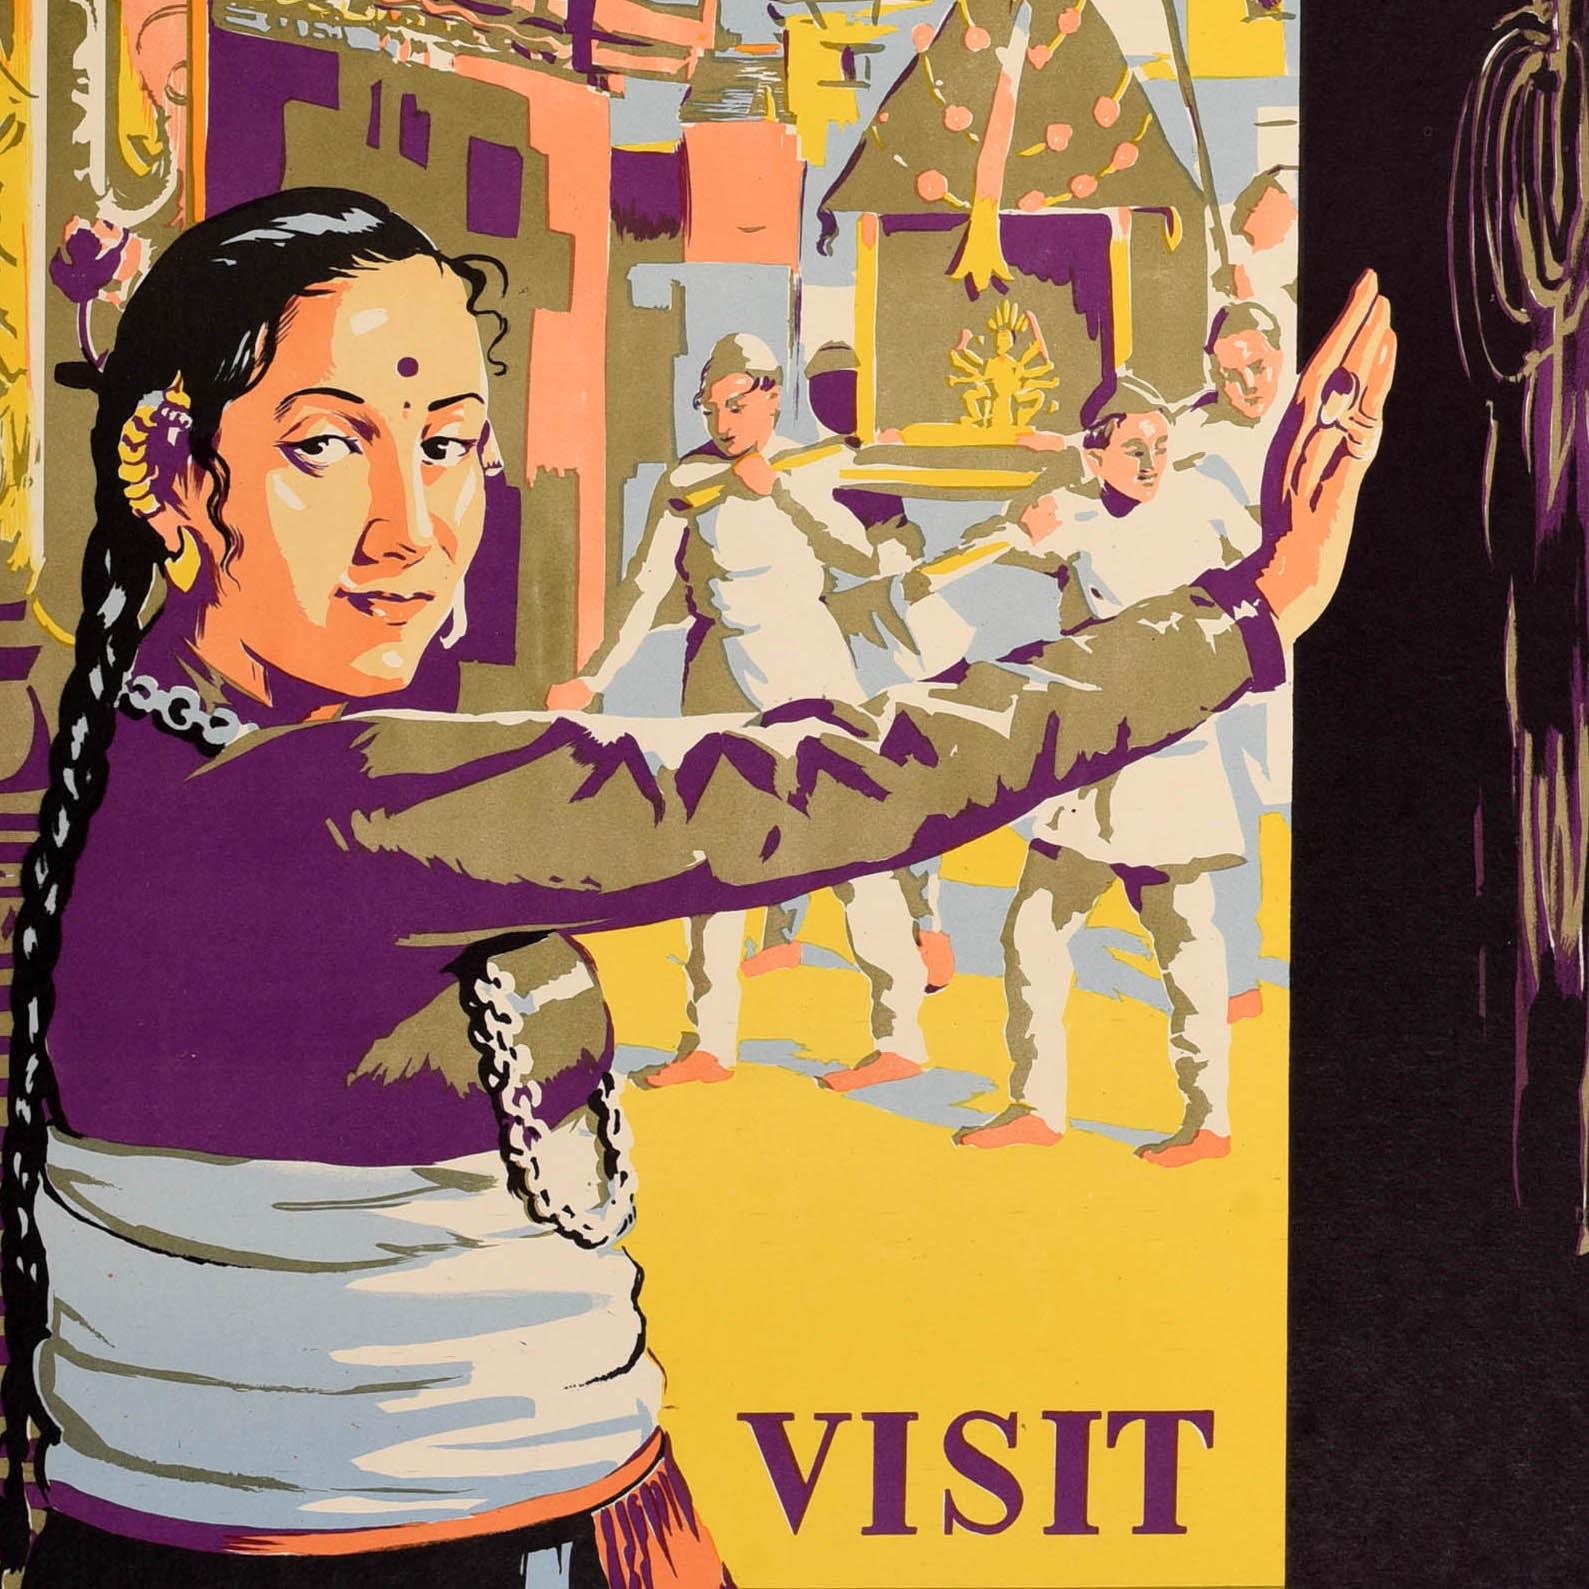 Original vintage Asia travel poster - Visit Kathmandu - featuring colourful artwork of a lady holding a door open for the viewer to reveal a procession walking in front of a Buddhist temple with snow topped mountains in the background, an eye